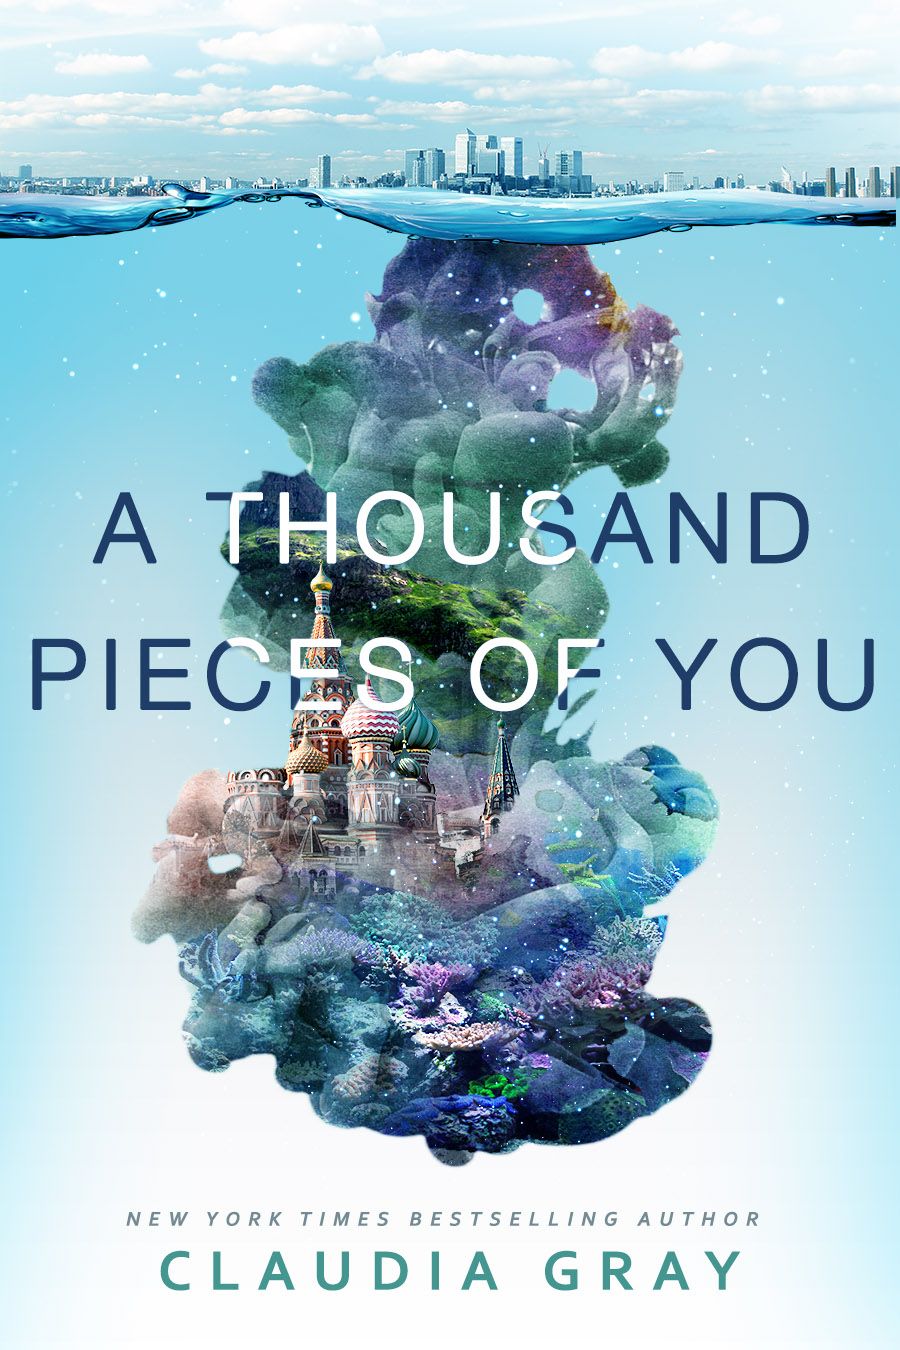 A THOUSAND PIECES OF YOU Claudia Gray